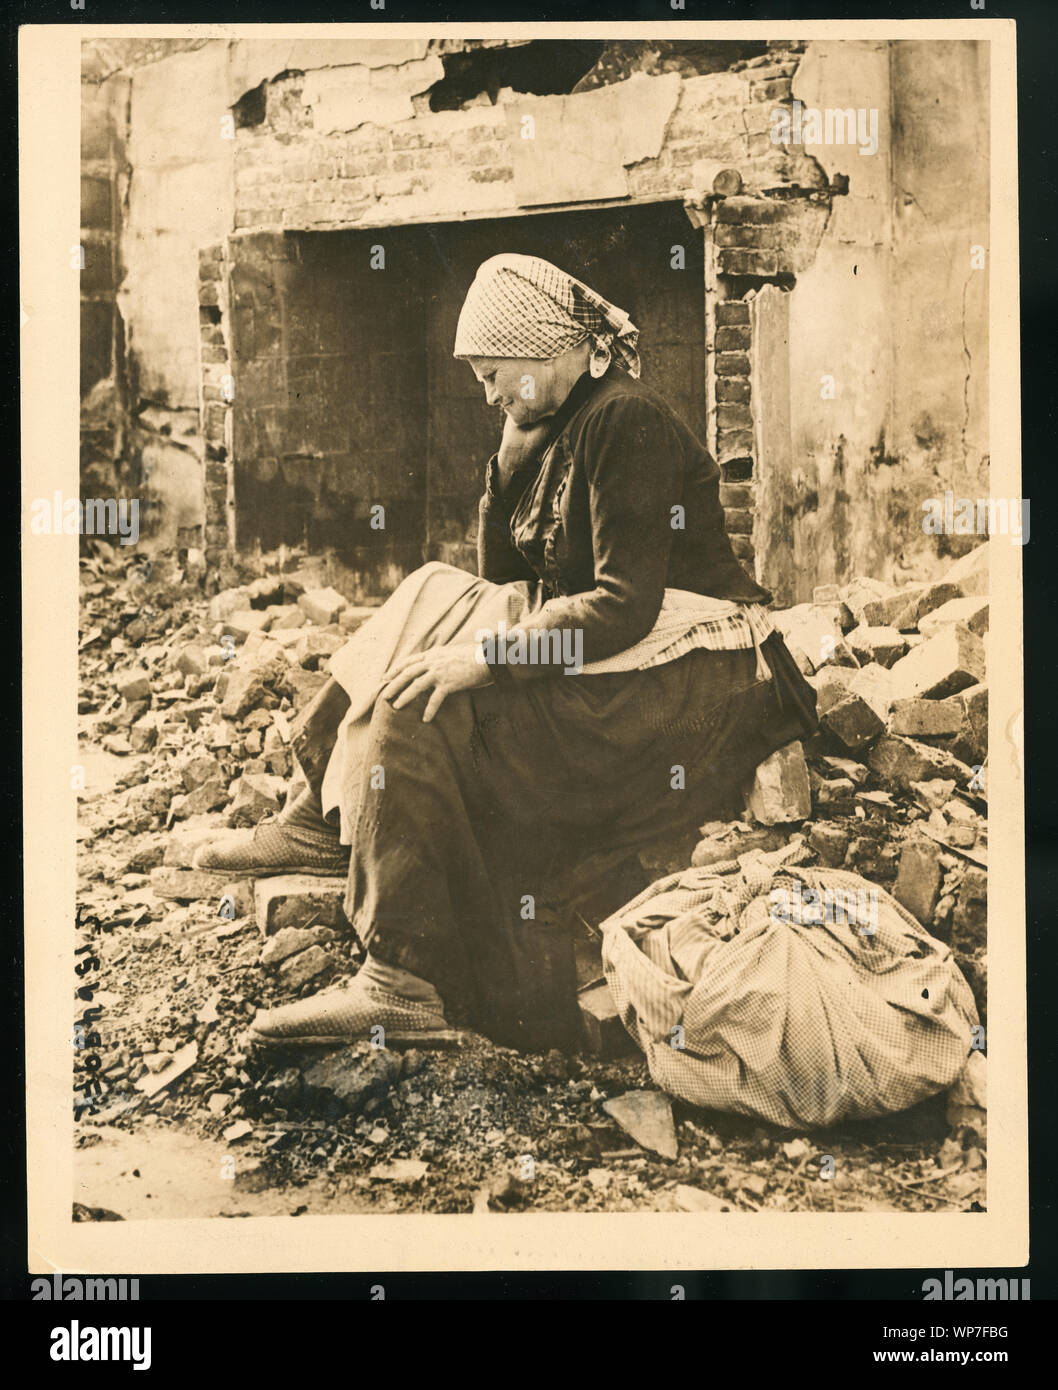 Learning of German retreat from her district, French woman returns to find her home a heap of ruins Stock Photo